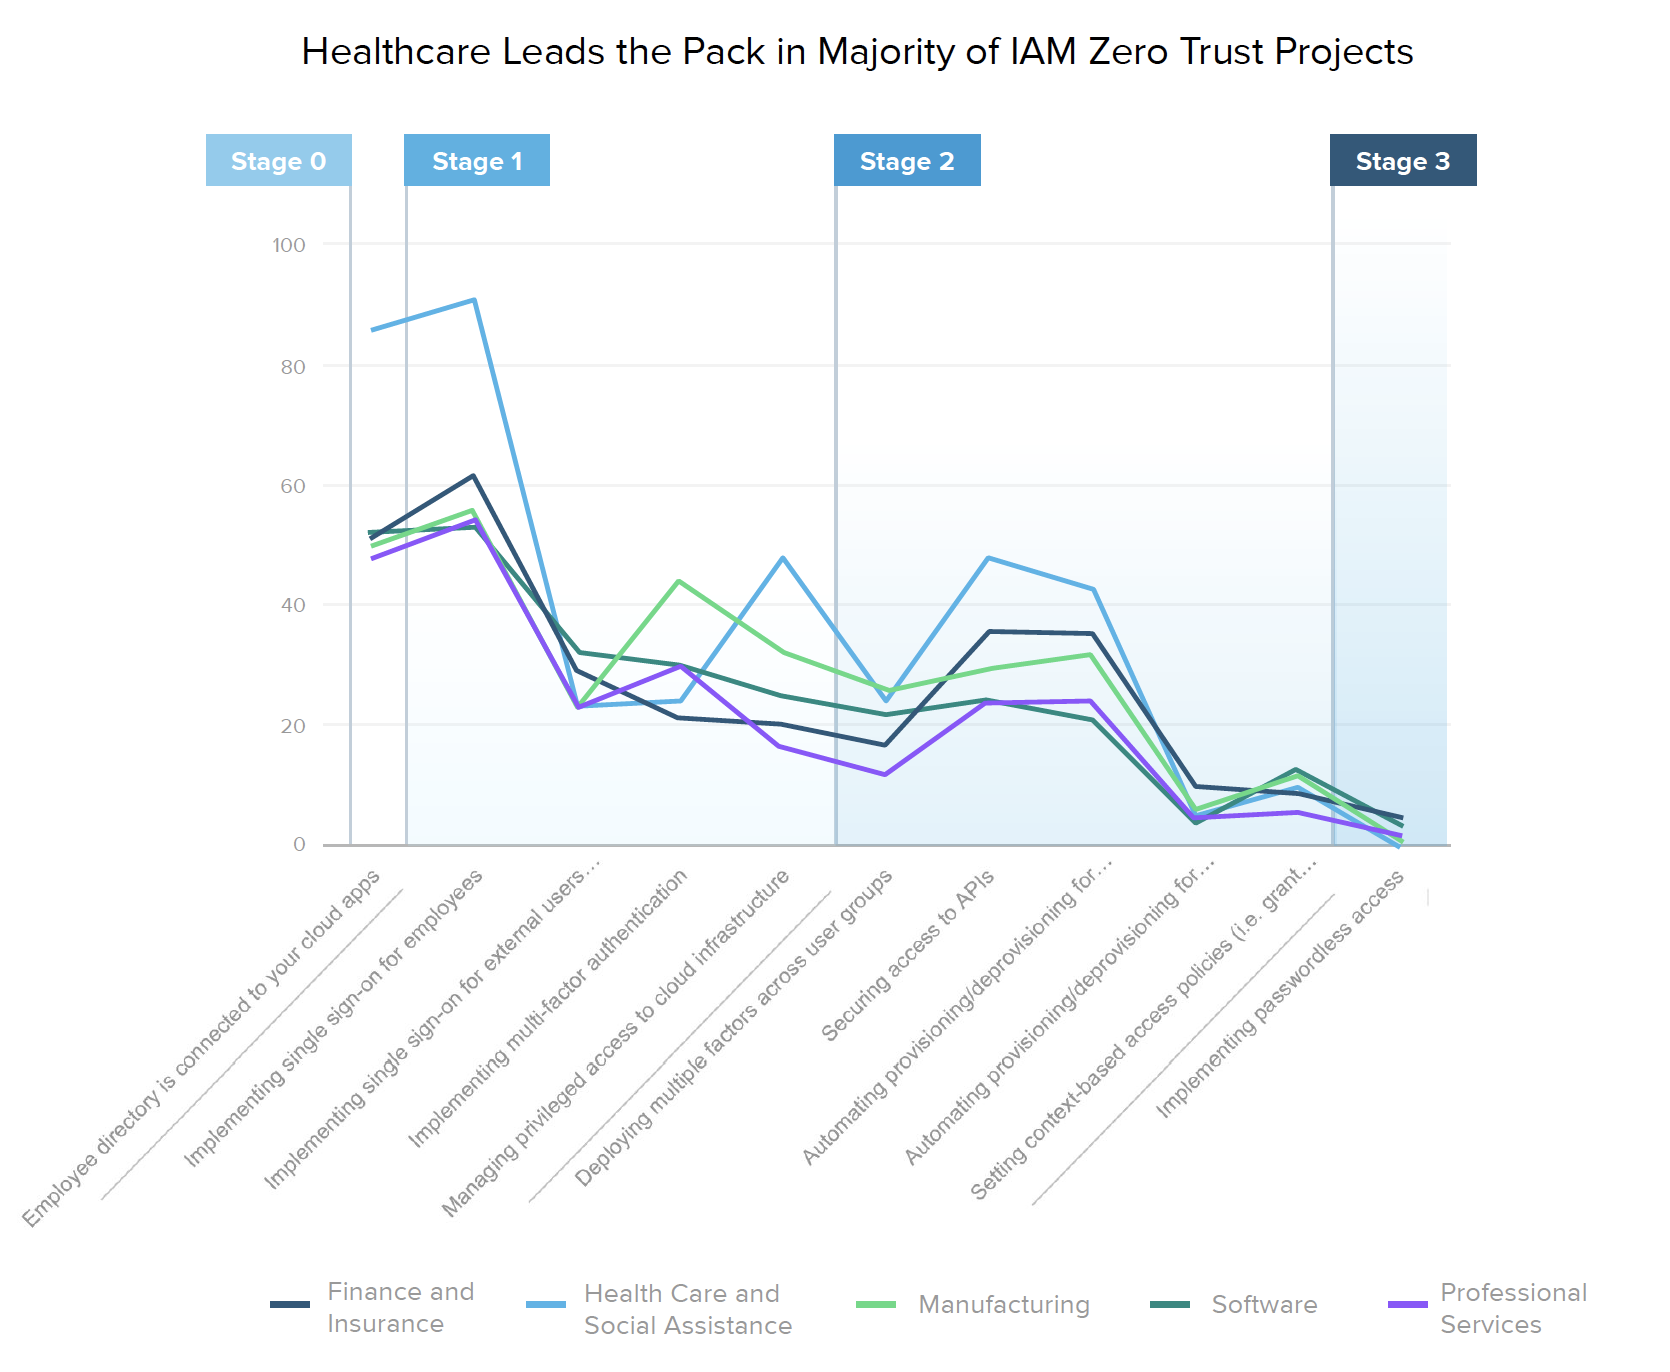 Healthcare Leads the Pack in Majority of IAM Zero Trust Projects